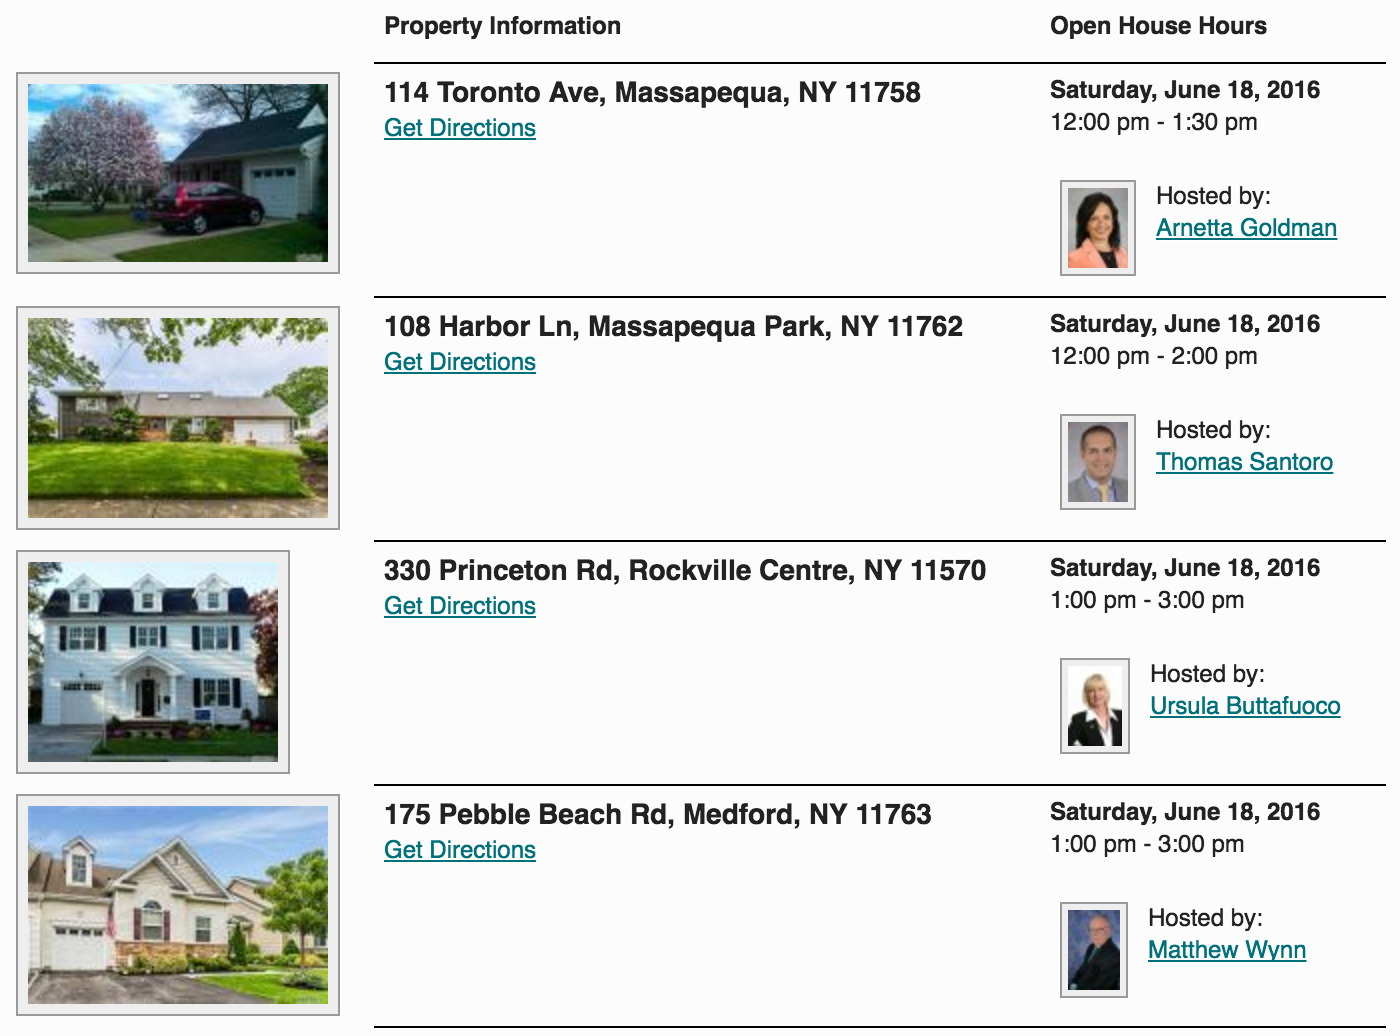 Open Houses This Weekend in Massapequa Park! 6/18 & 6/19!